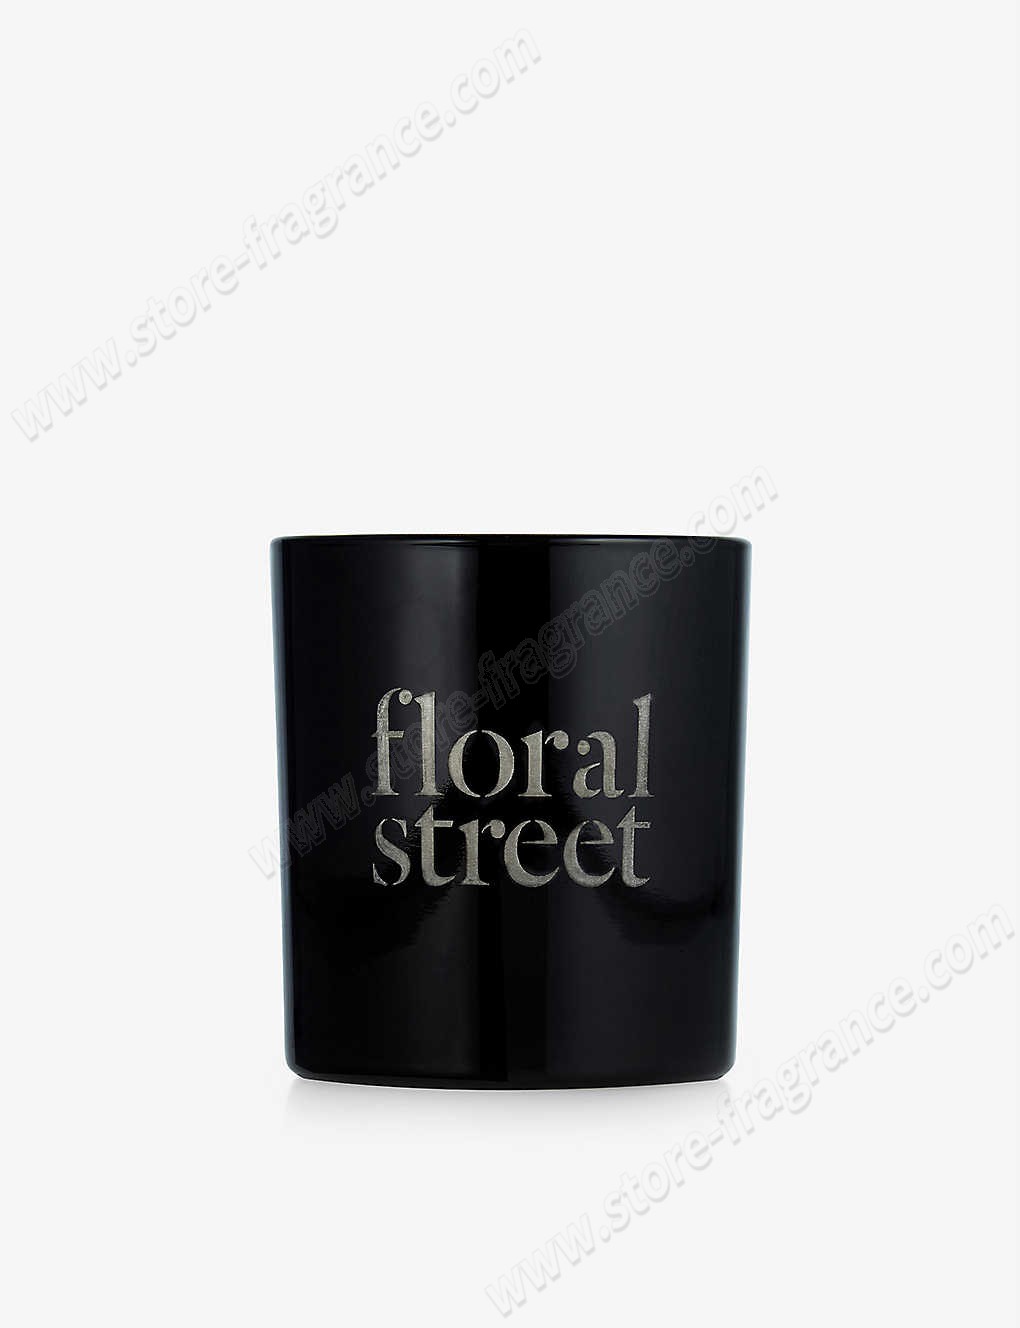 FLORAL STREET/Fireplace candle 200g ✿ Discount Store - FLORAL STREET/Fireplace candle 200g ✿ Discount Store